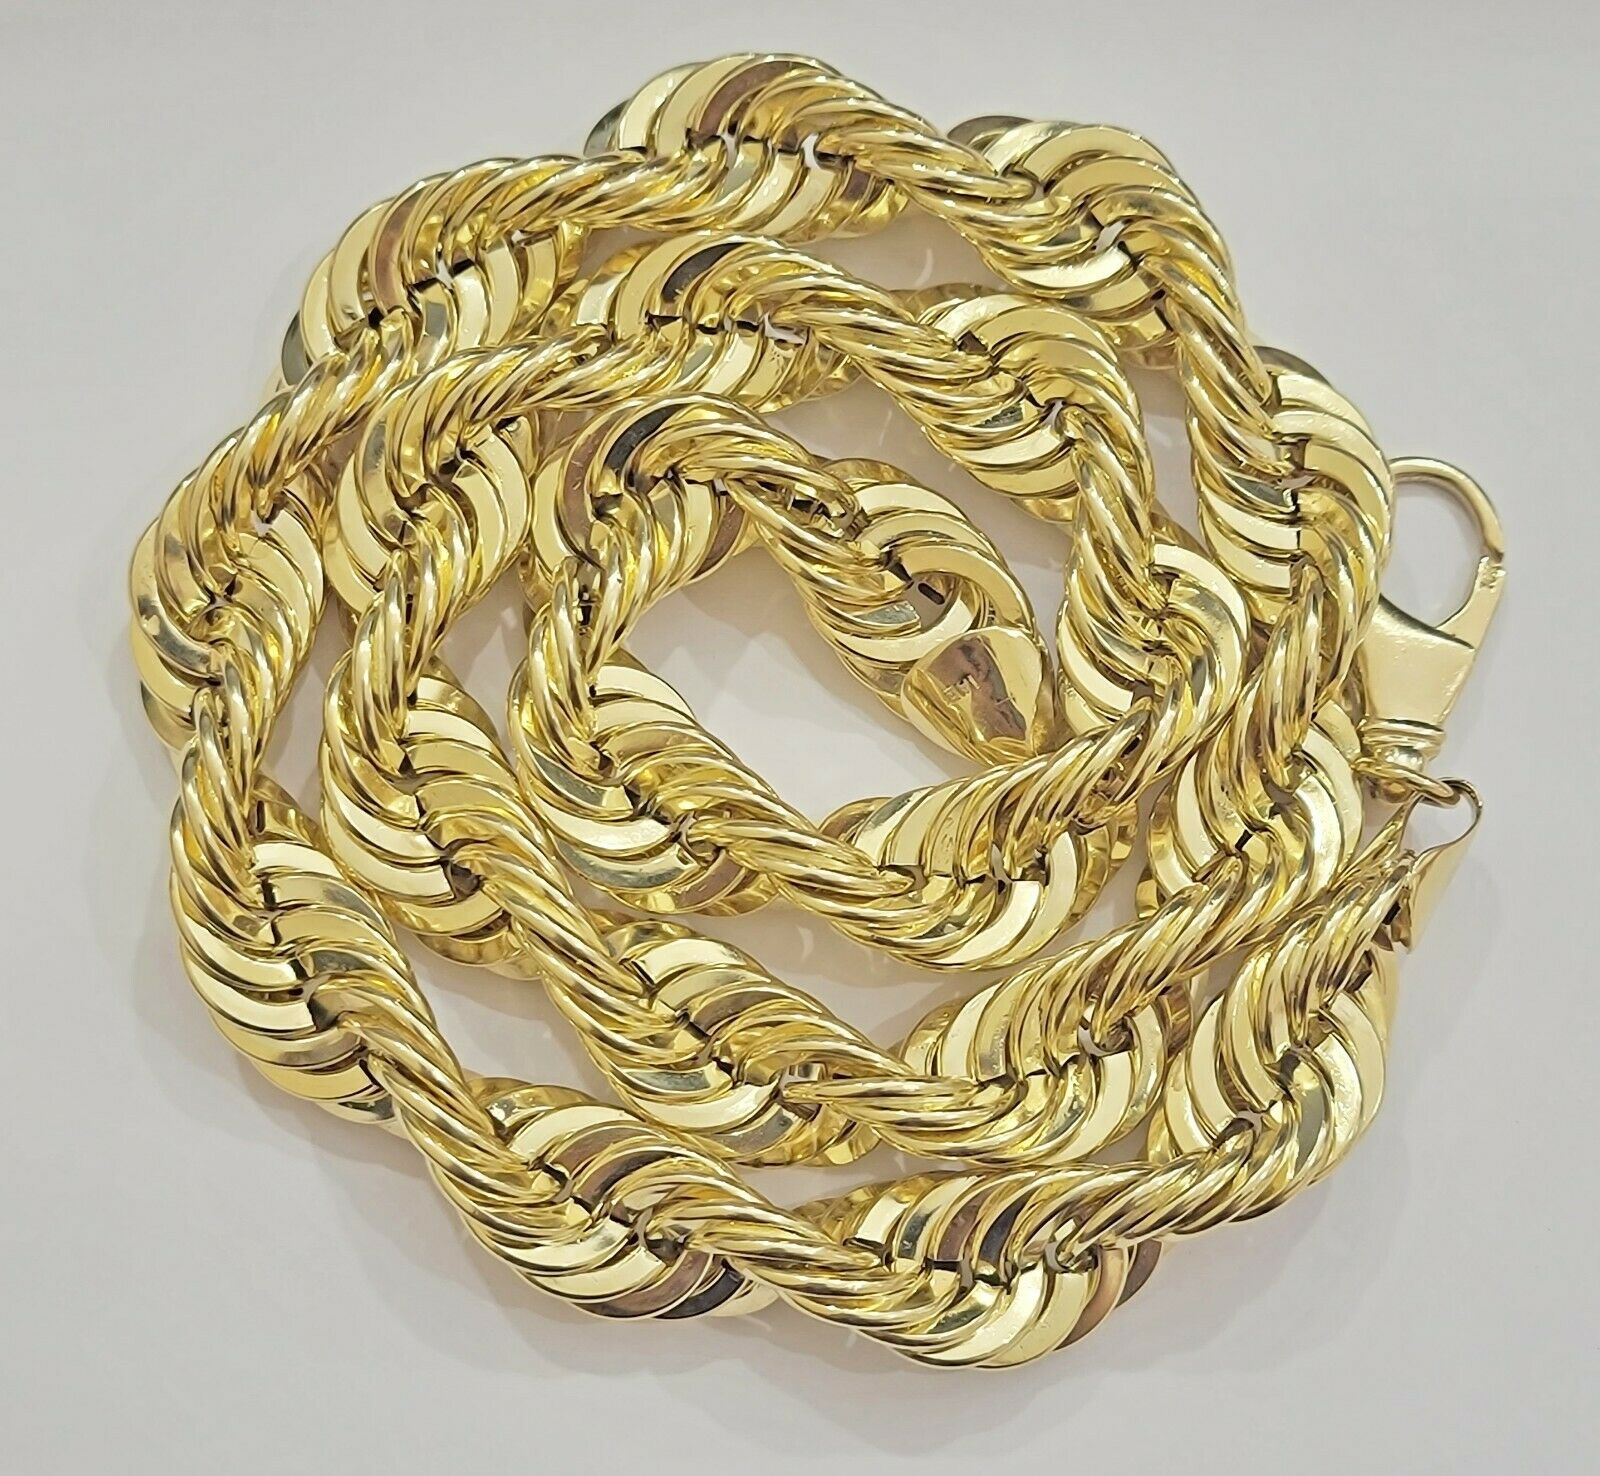 REAL 10K Yellow Gold Rope Chain Necklace 15MM Thick 22" Diamond Cut MEN'S,SHORT